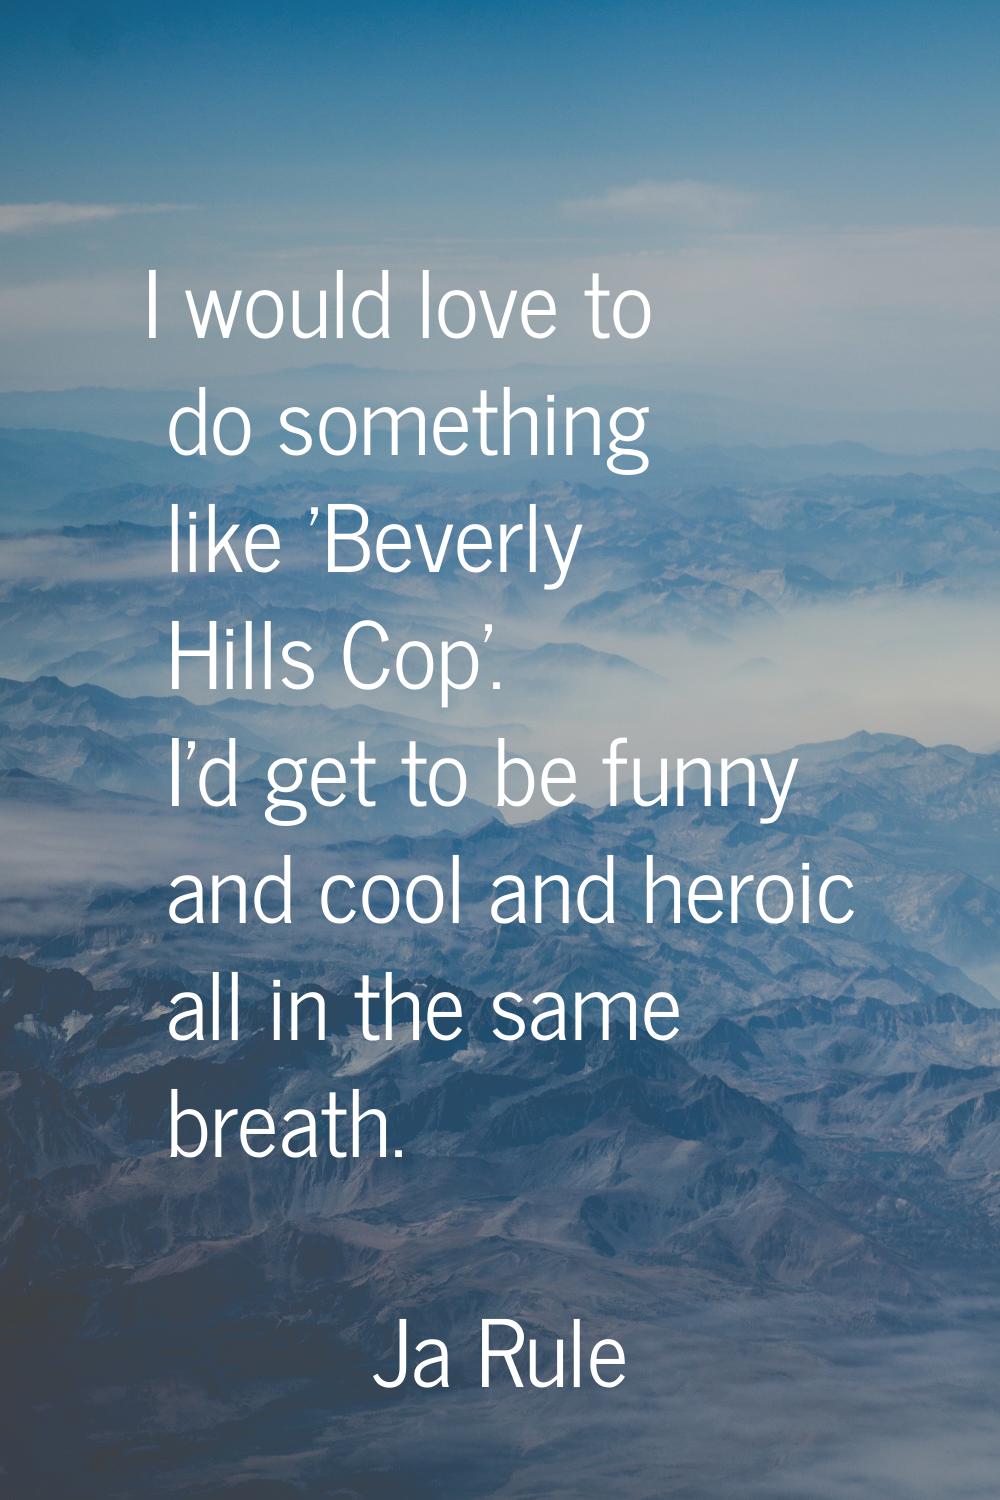 I would love to do something like 'Beverly Hills Cop'. I'd get to be funny and cool and heroic all 